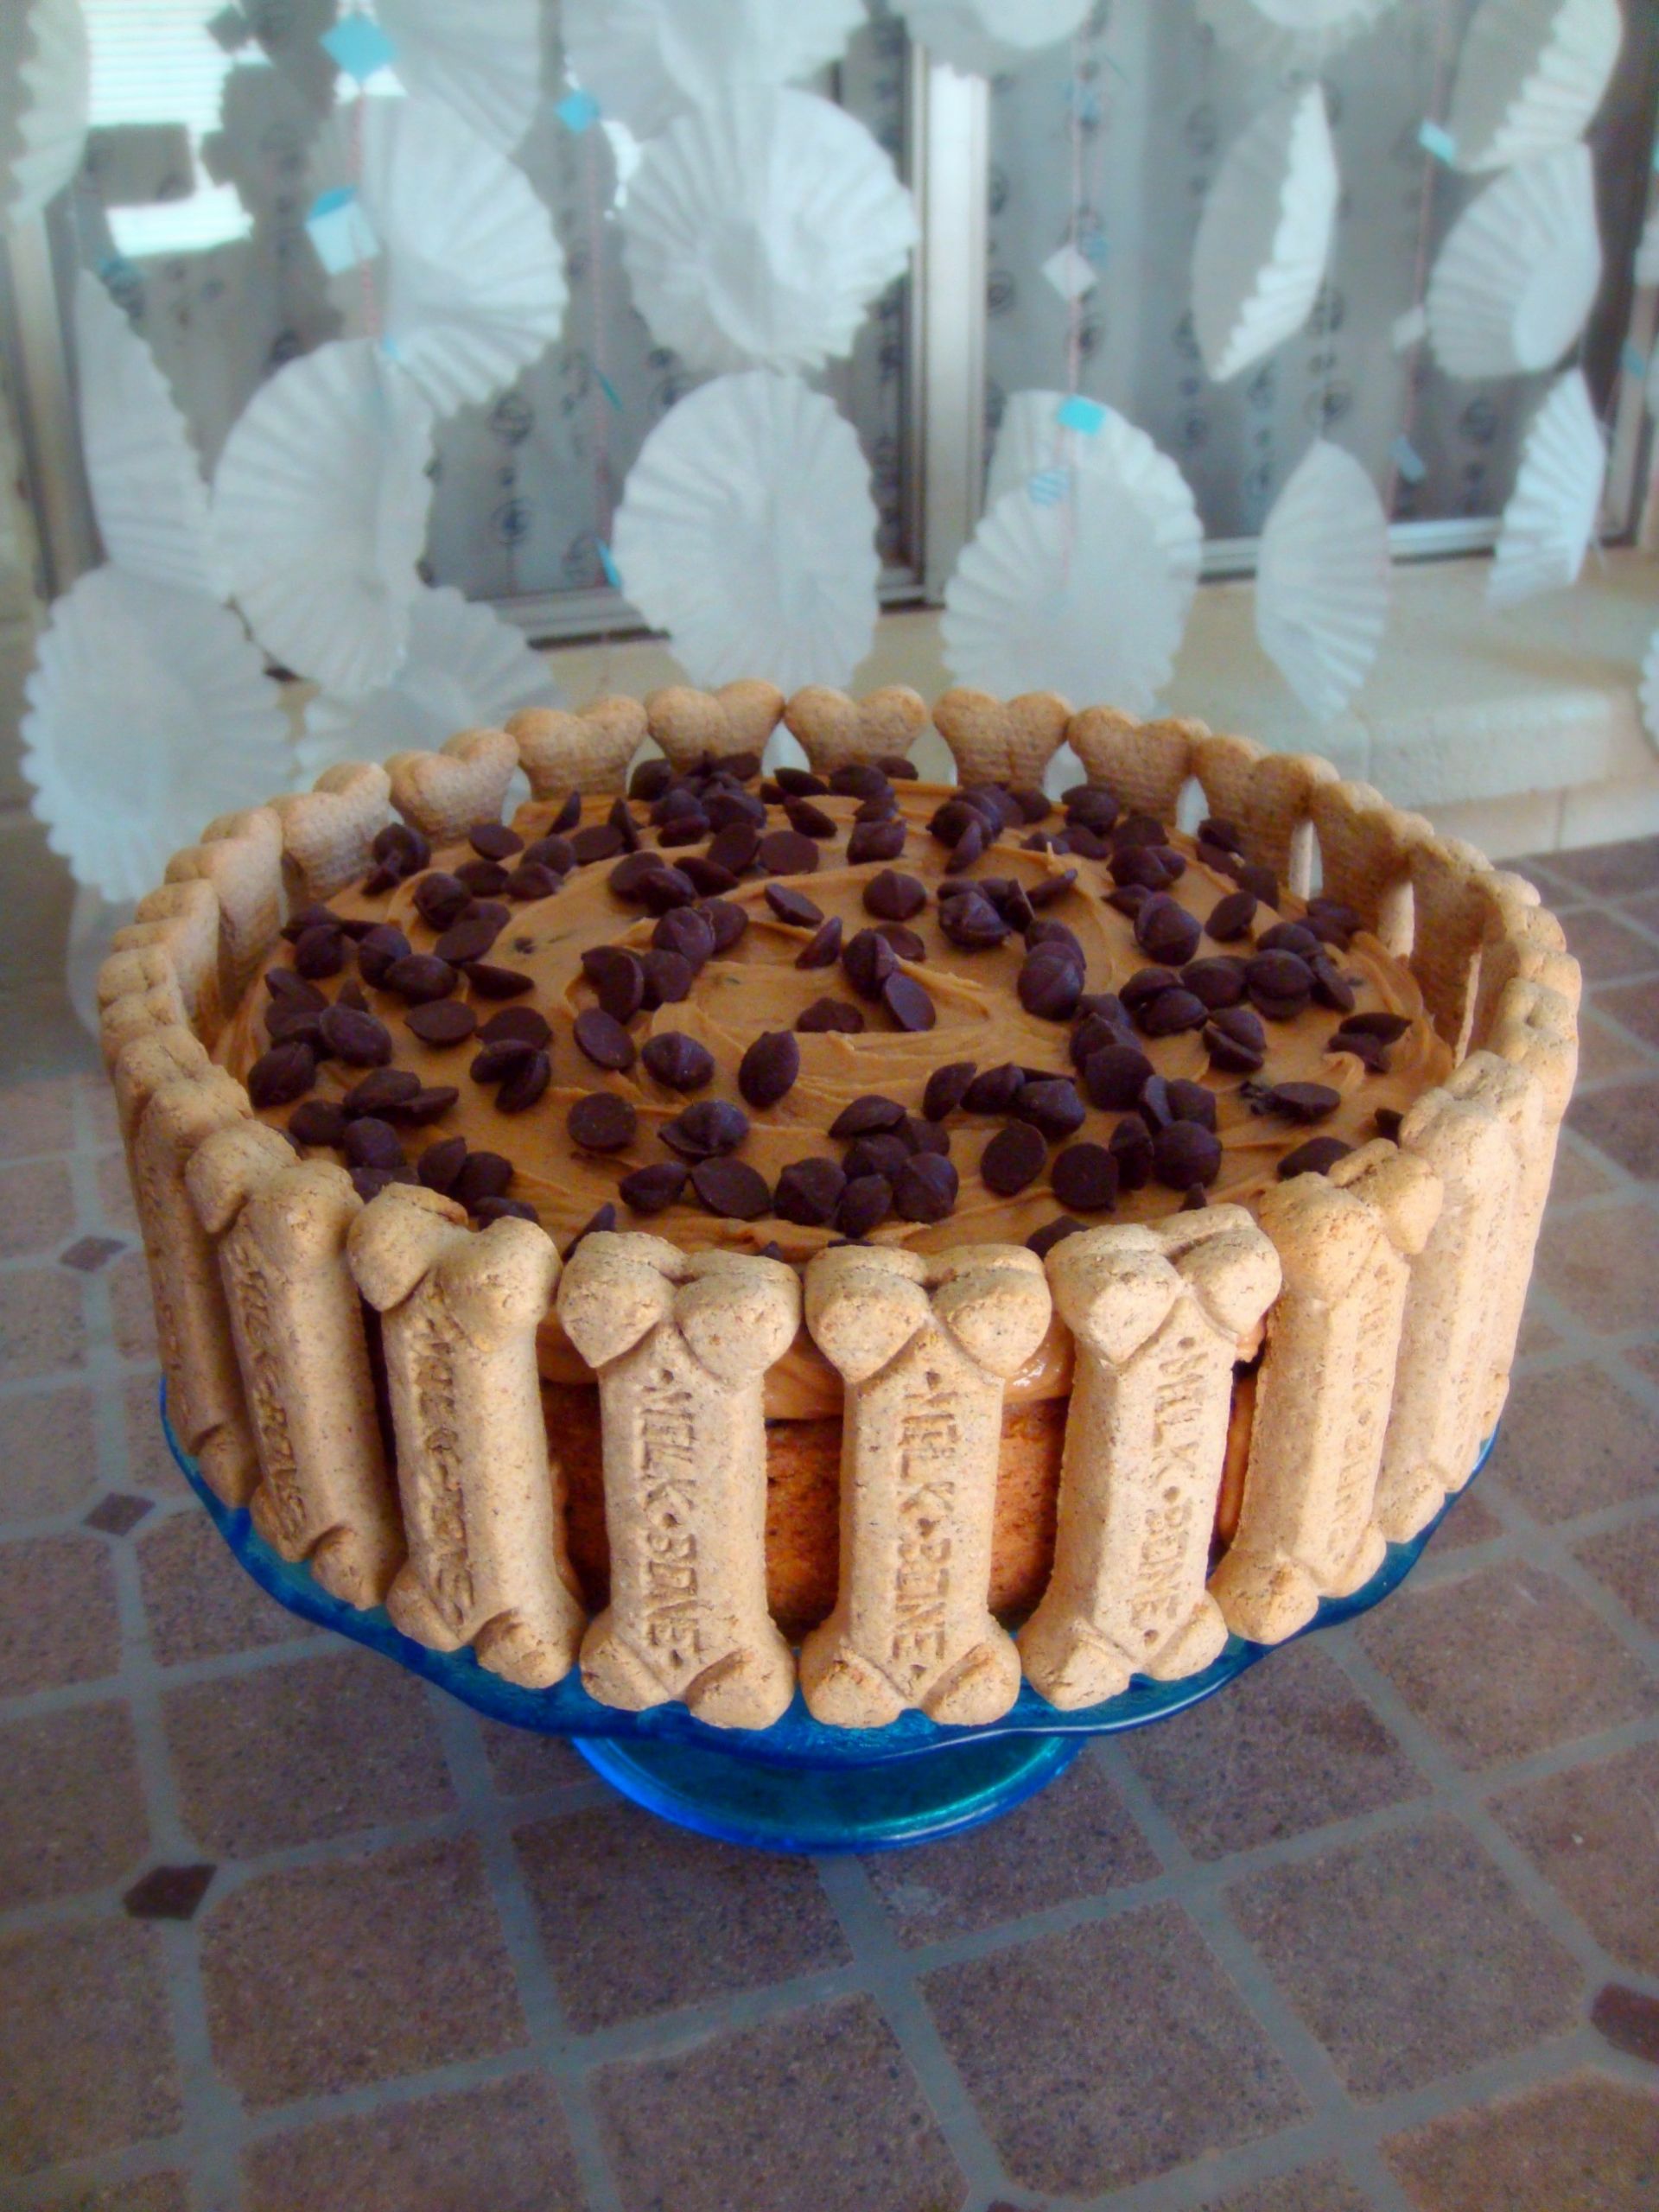 Dog Birthday Cake Recipe Without Peanut Butter
 Banana Carob Oat Cake with Peanut Butter Frosting Baked